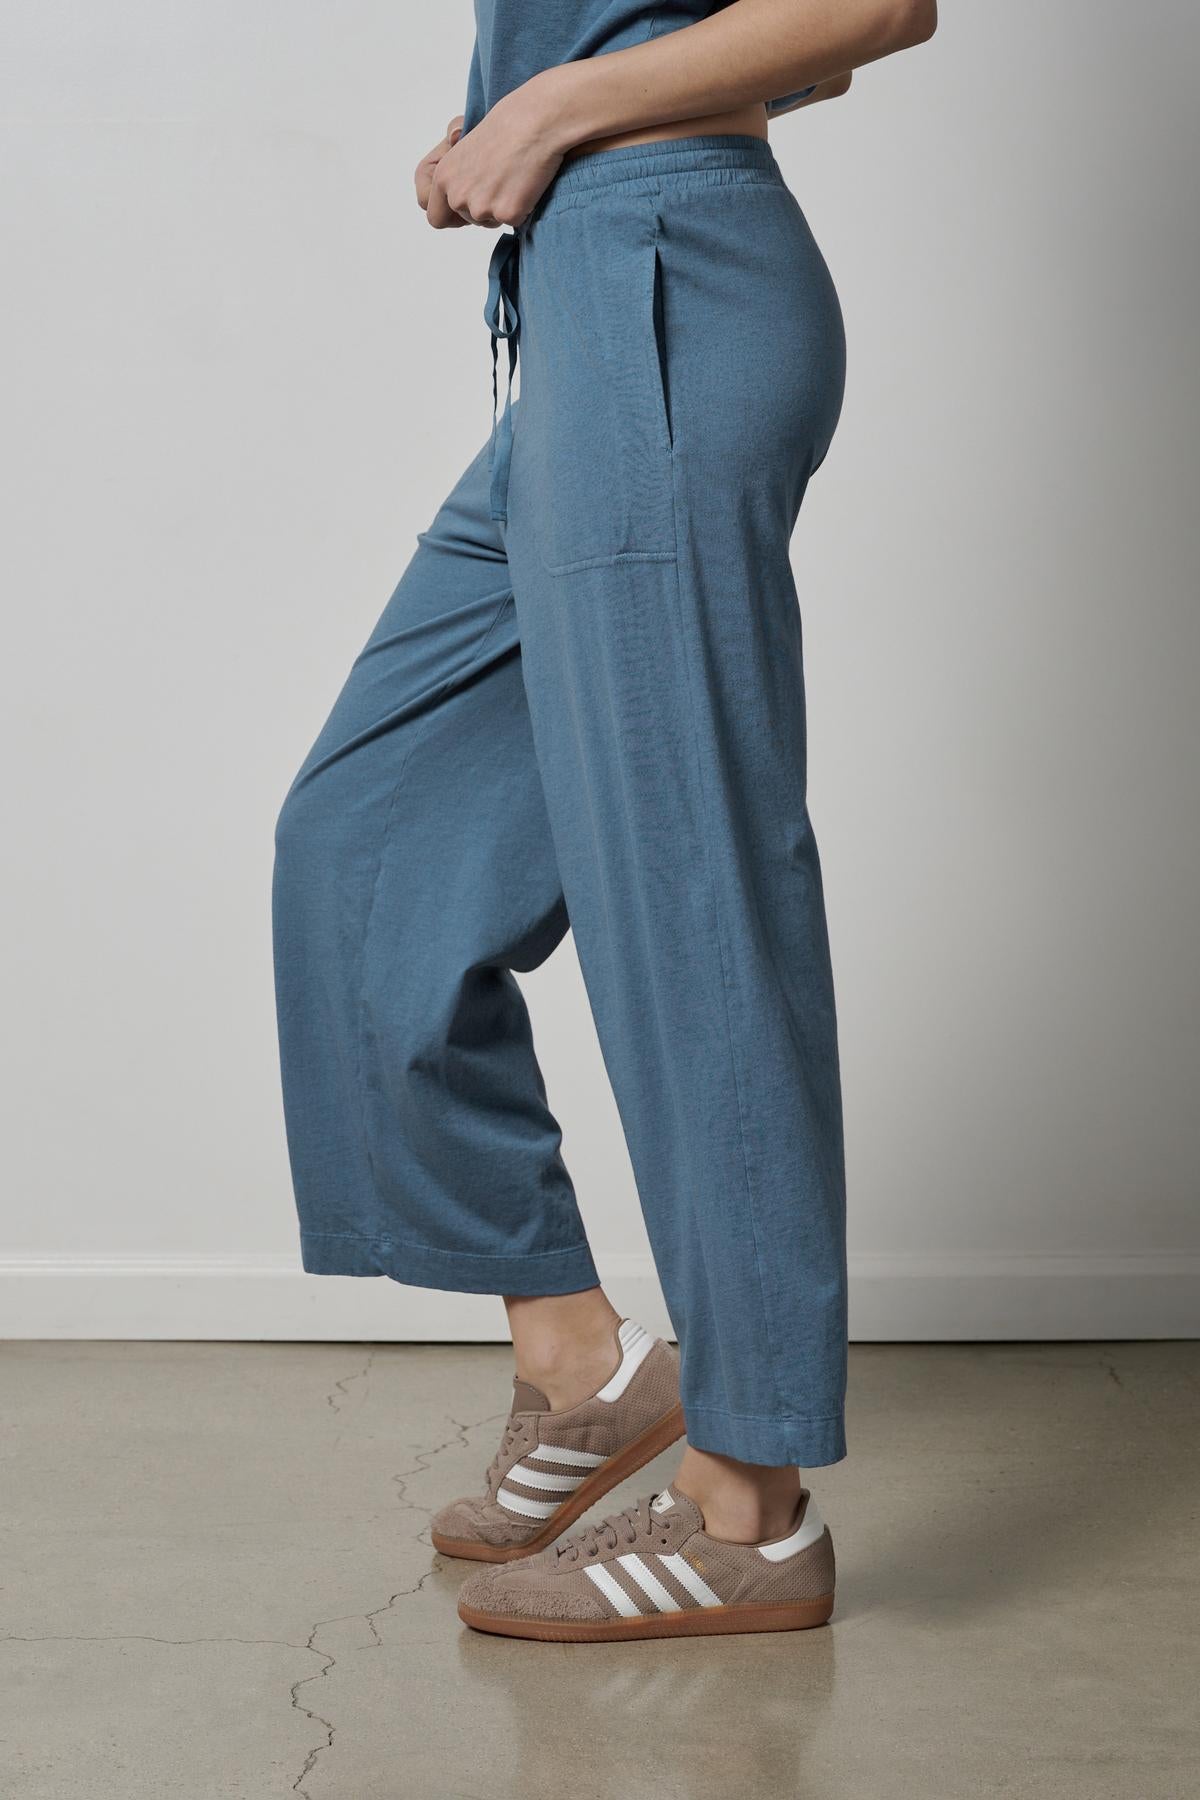 A woman wearing blue PISMO PANT made of organic cotton and Velvet by Jenny Graham sneakers.-35496003862721